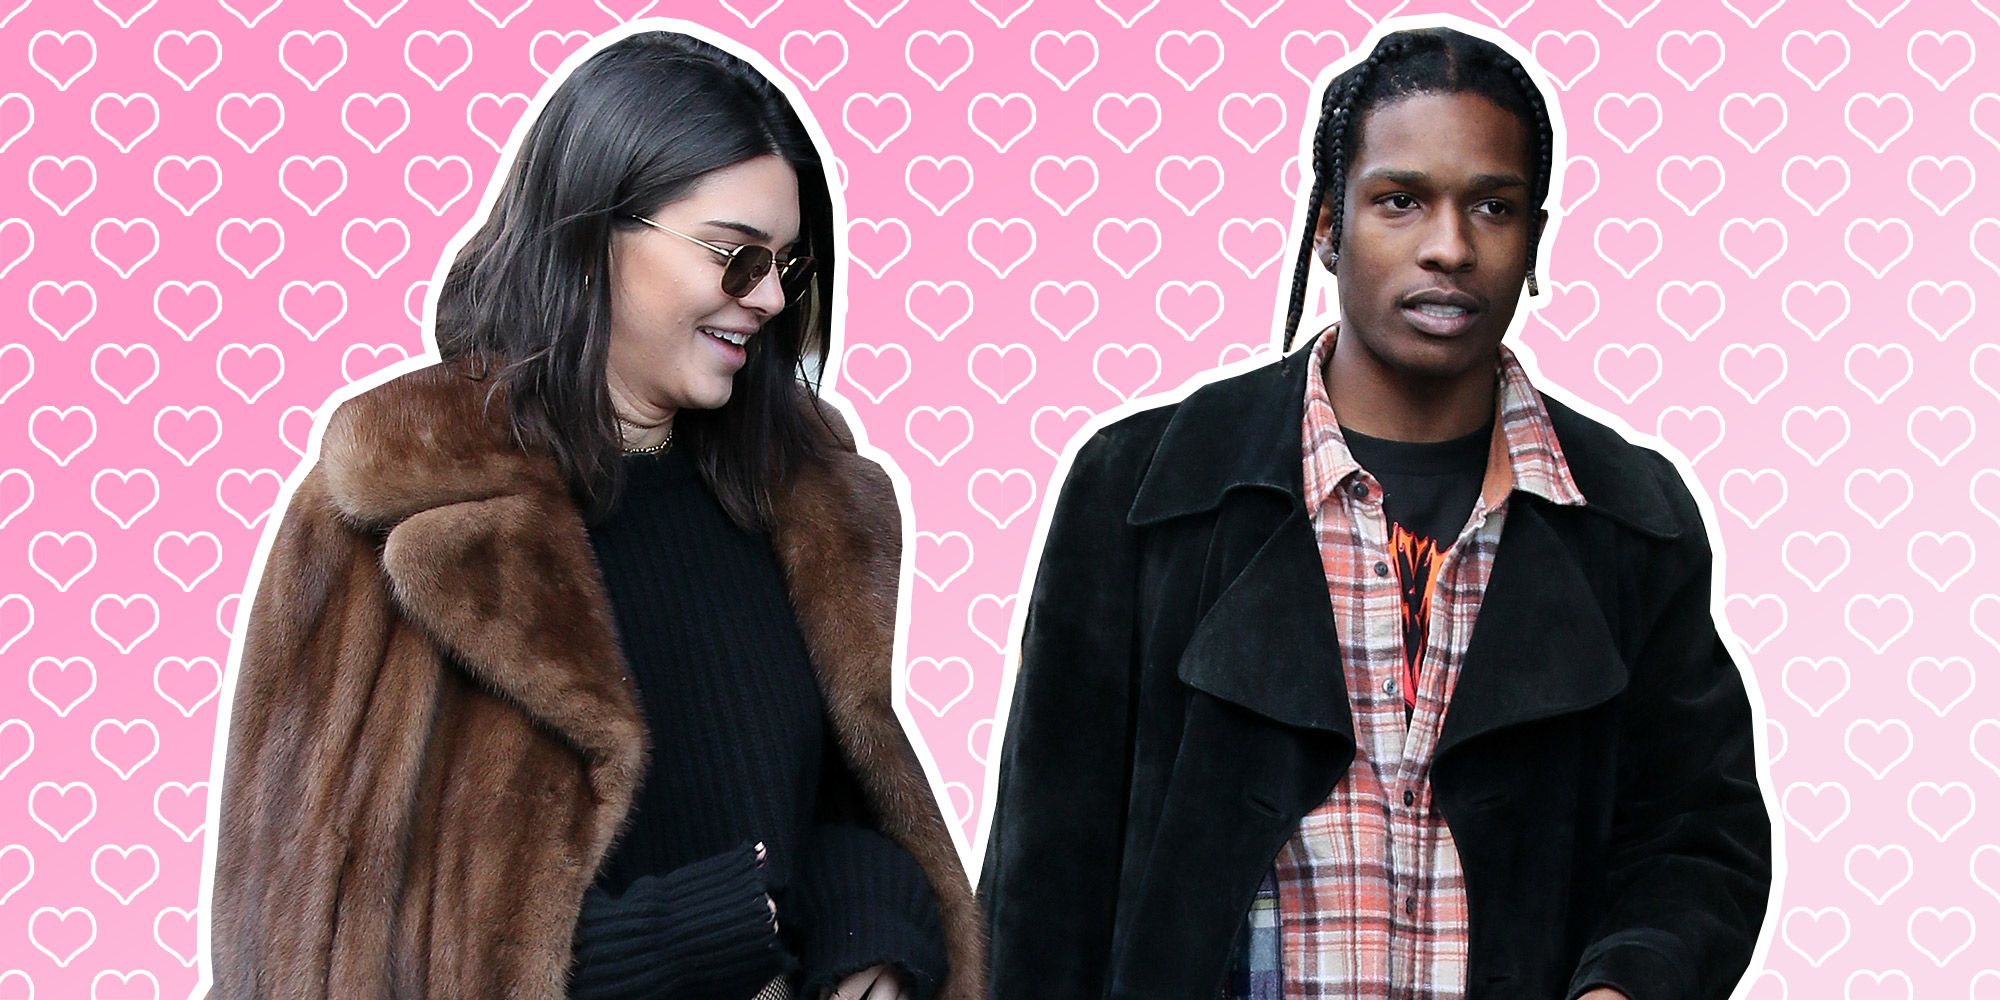 Kendall Jenner Parties With A$AP Rocky in Miami